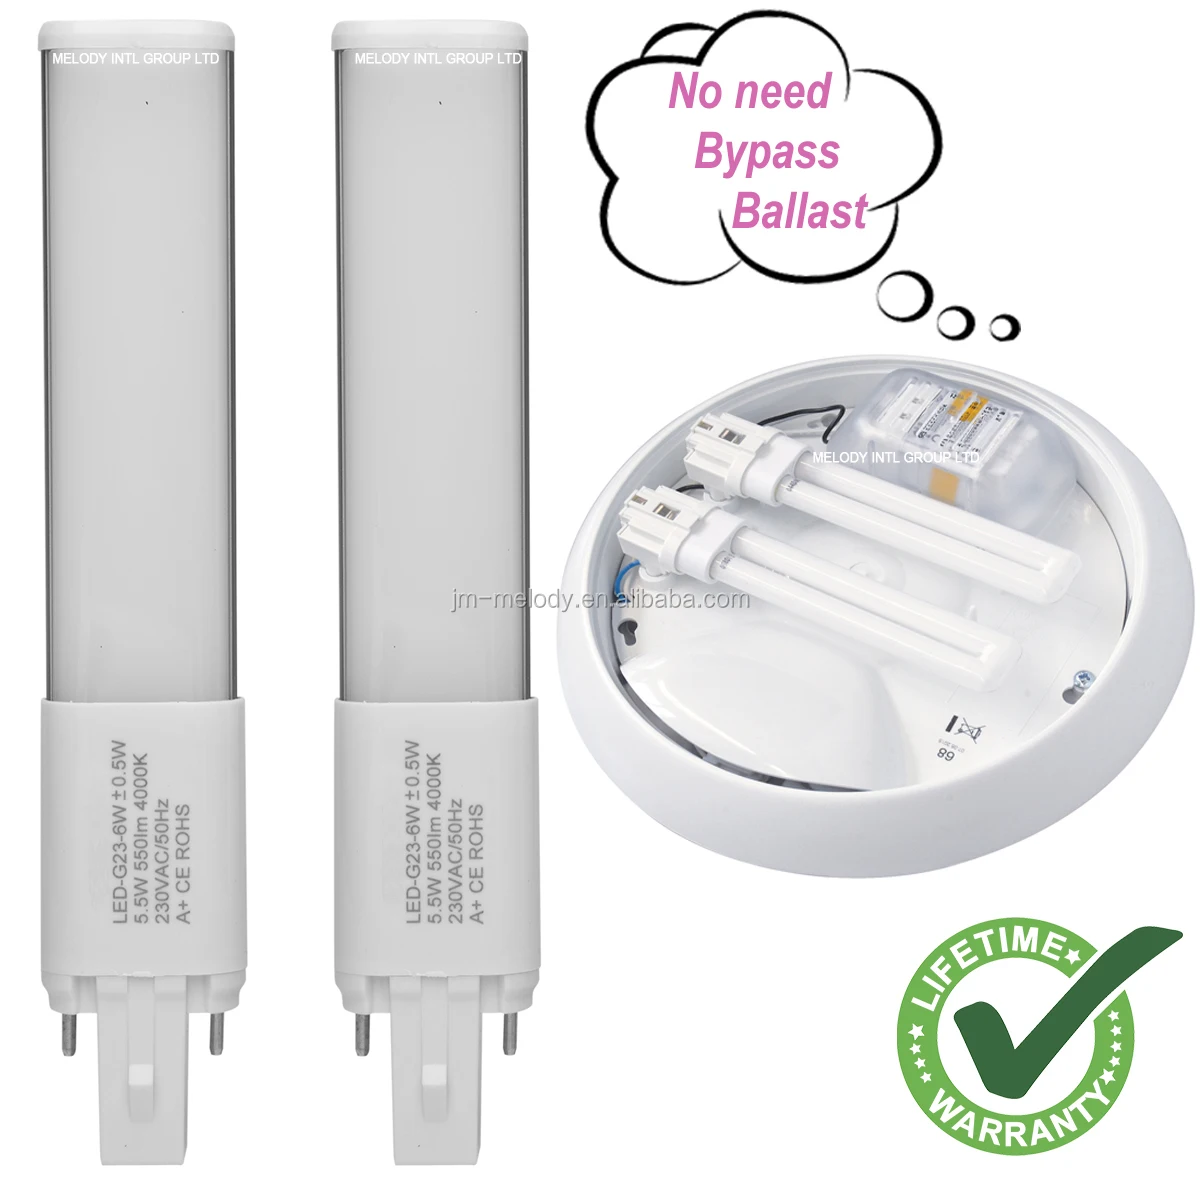 Tal højt Shah velstand Source New 6W G23 LED PL lamp light compatible ballast 2 pin g23 LED Bulb  Tandem use 2 pcs directly replace traditional 13w CFL G23 on m.alibaba.com